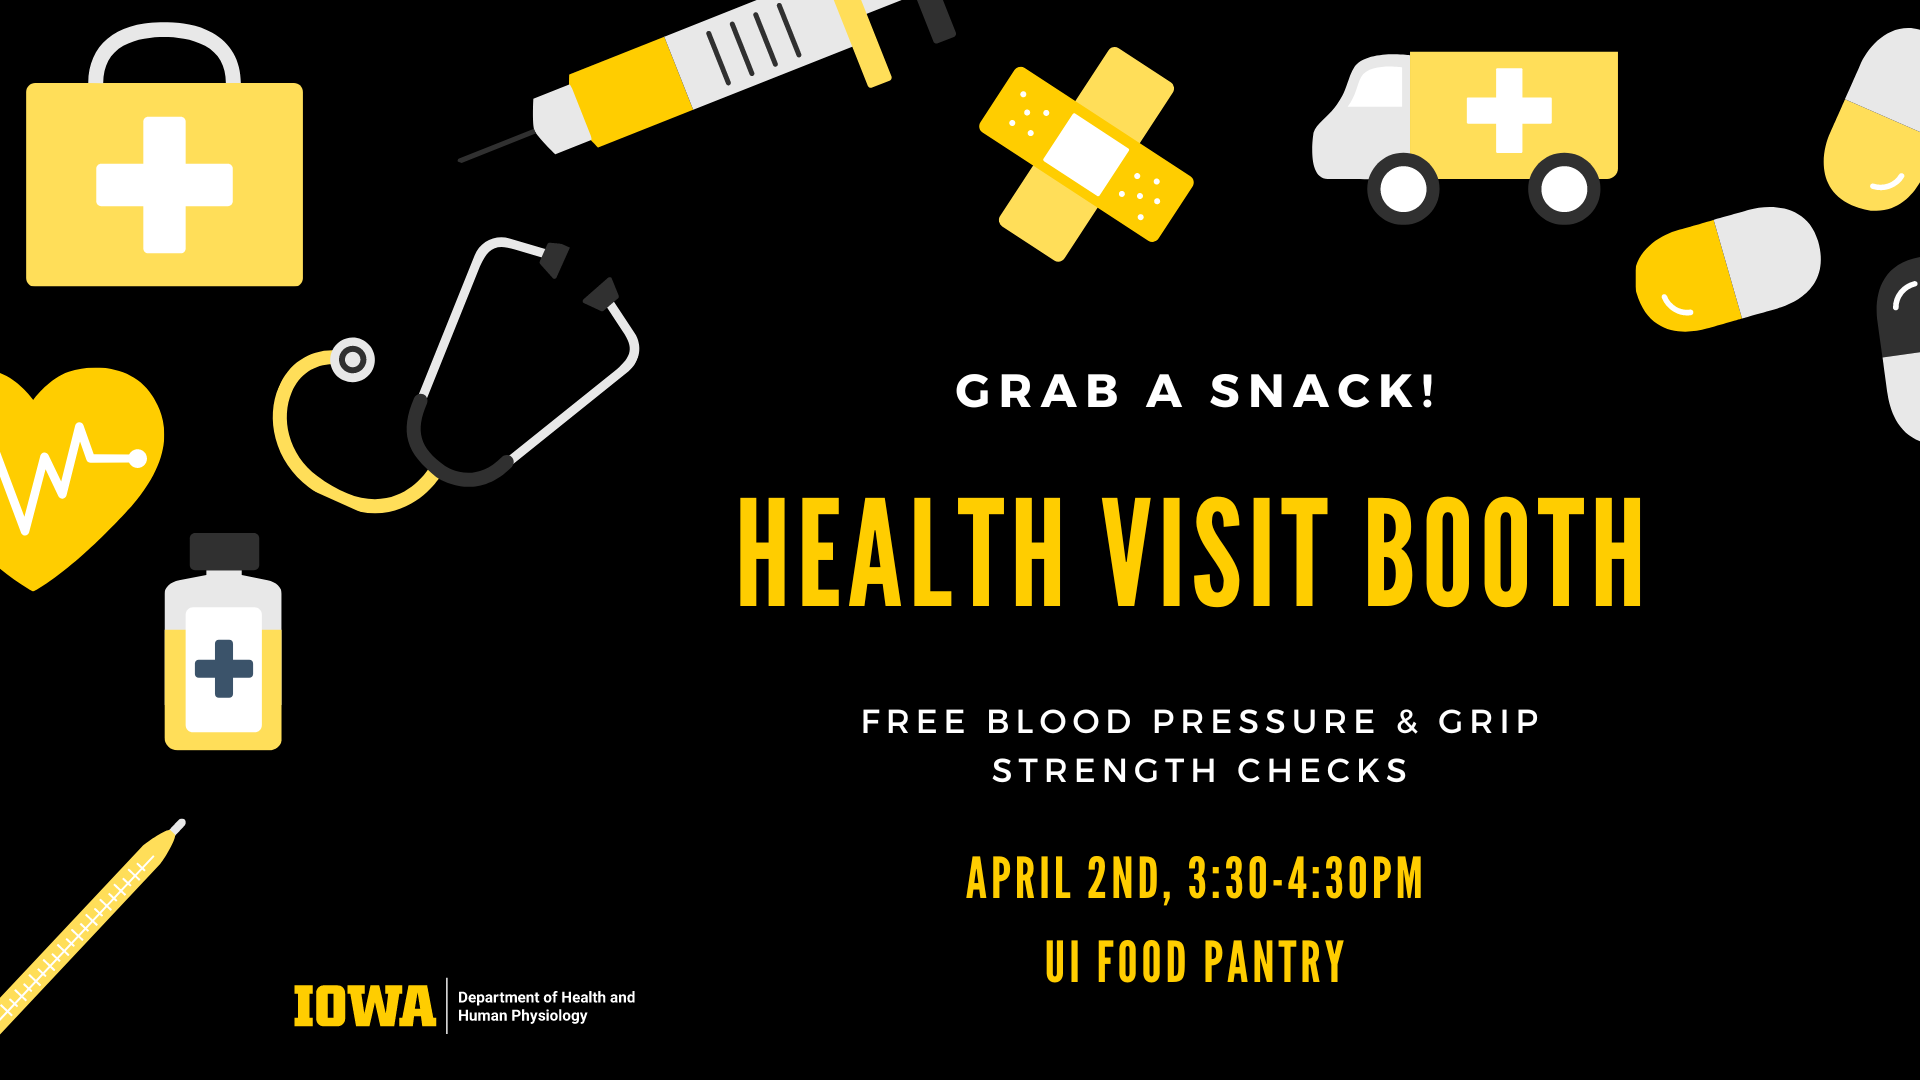 Students in HHP:3820 are planning, implementing, and evaluating health events at the UI Food Pantry on April 2, 9, 16, and 23rd